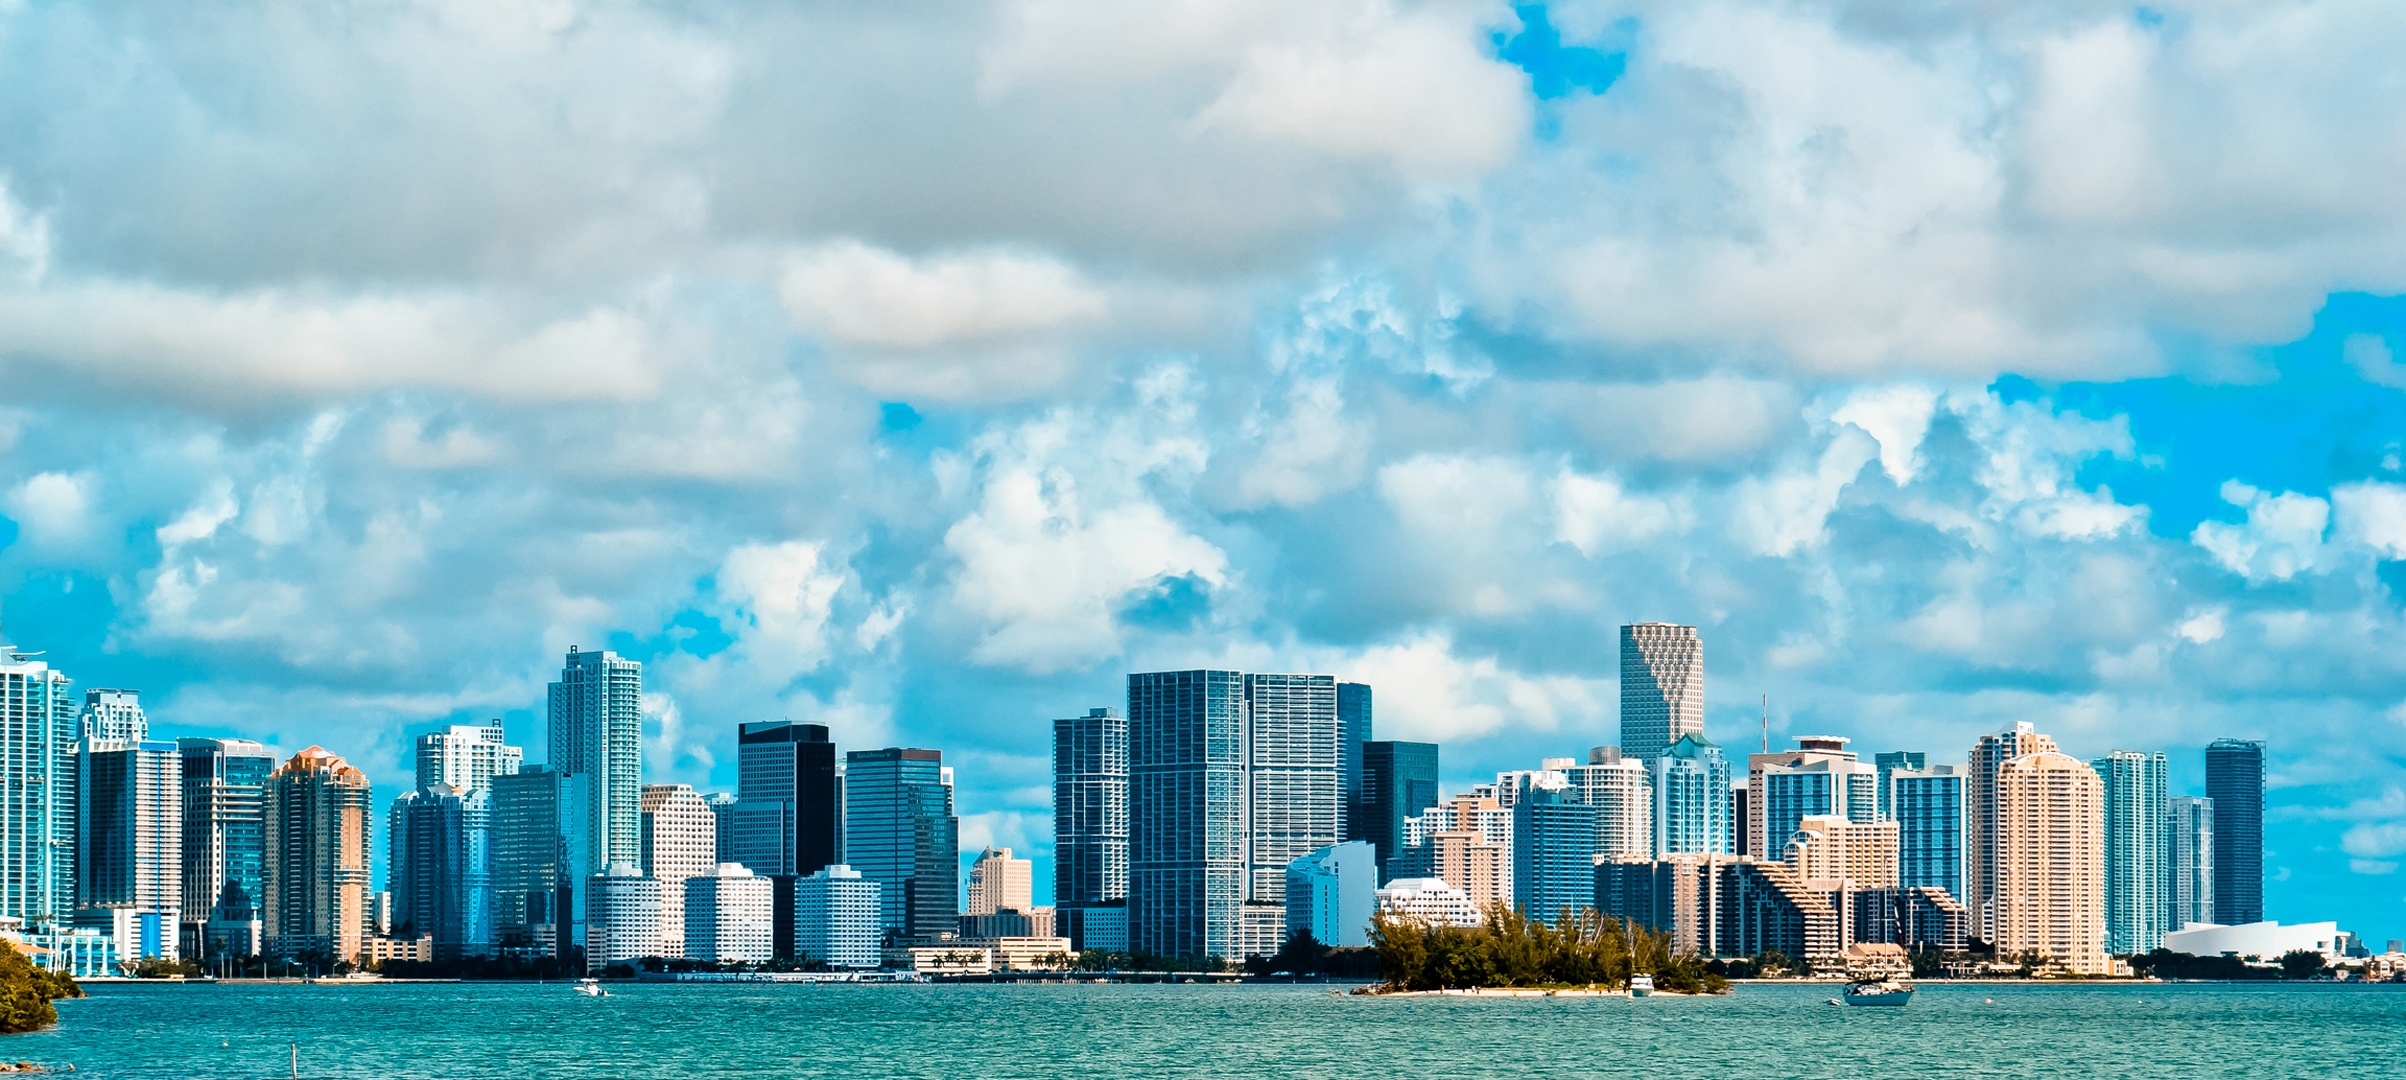 miami, building, high rise buildings, cities, sky, clouds, usa, united states, america, florida, miami beach HD wallpaper